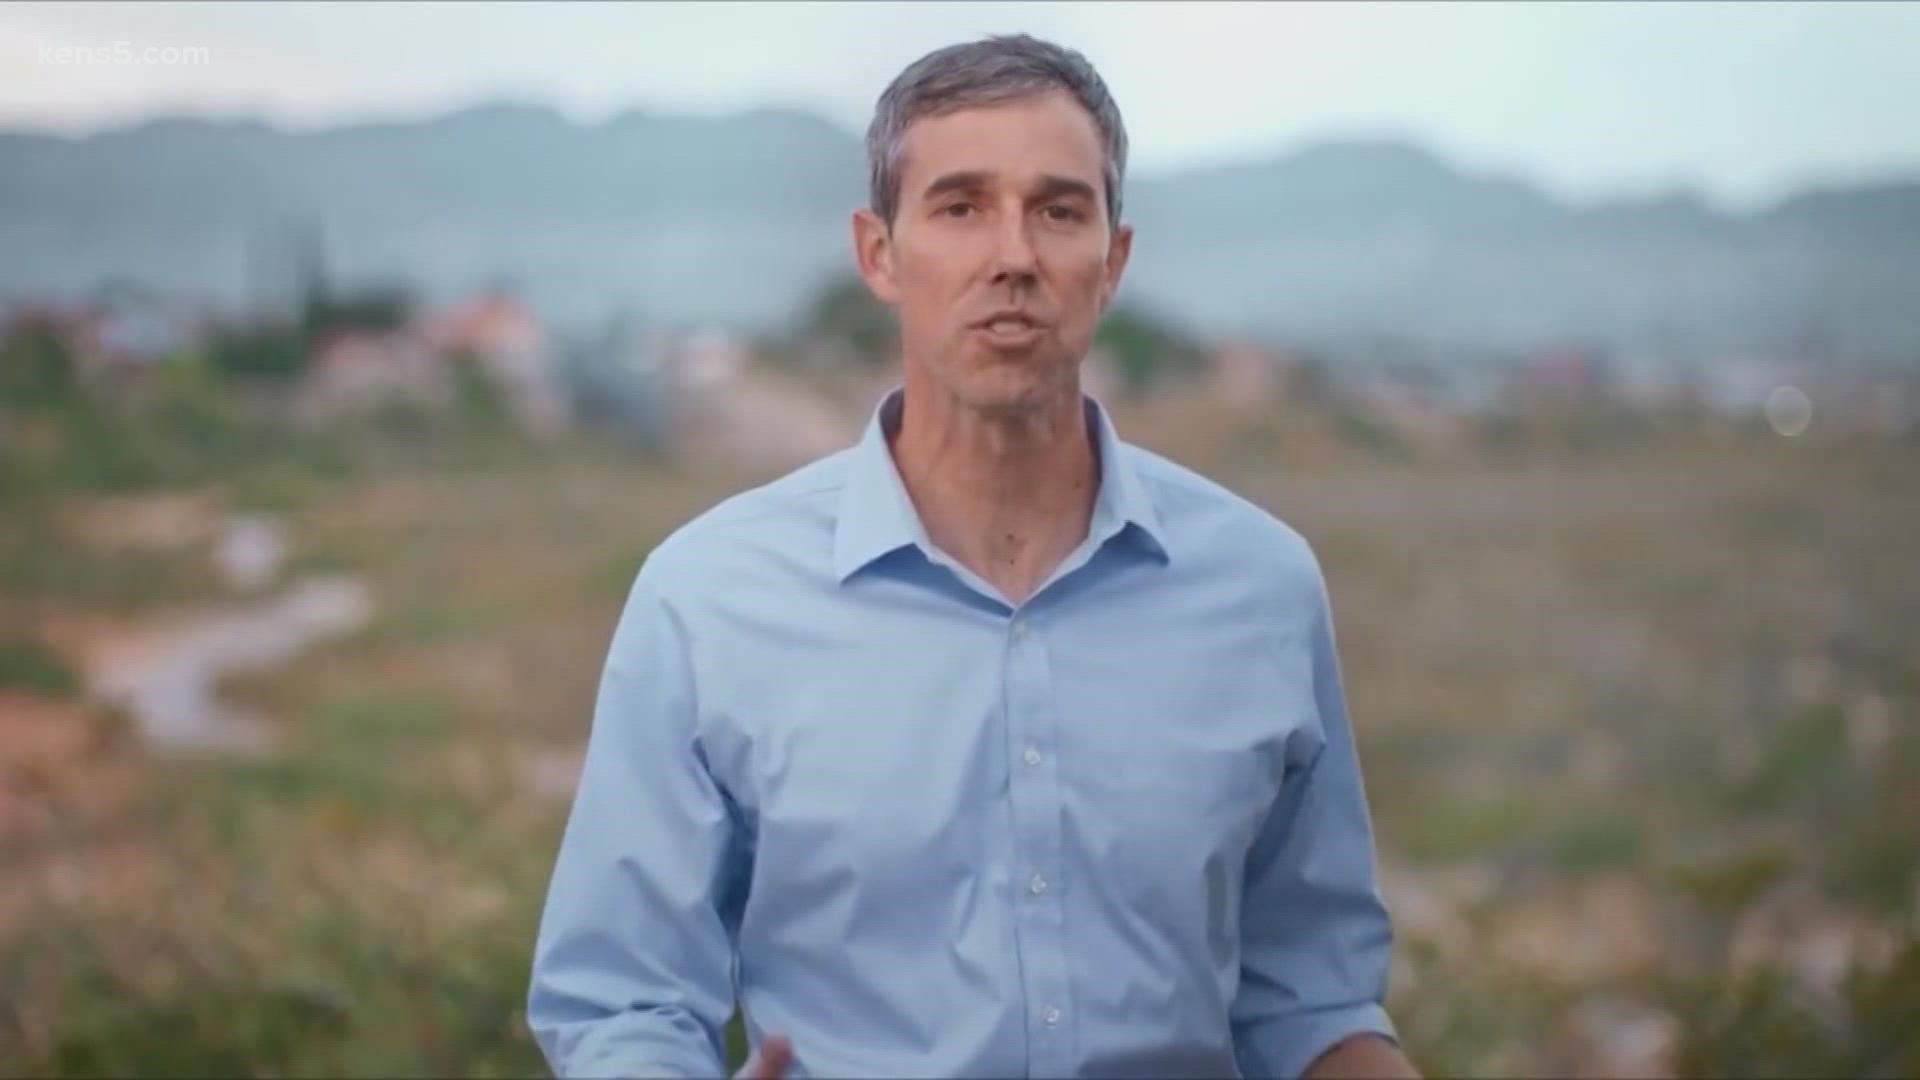 "Those in positions of public trust have stopped listening to, serving and paying attention to and trusting the people of Texas," O'Rourke said.